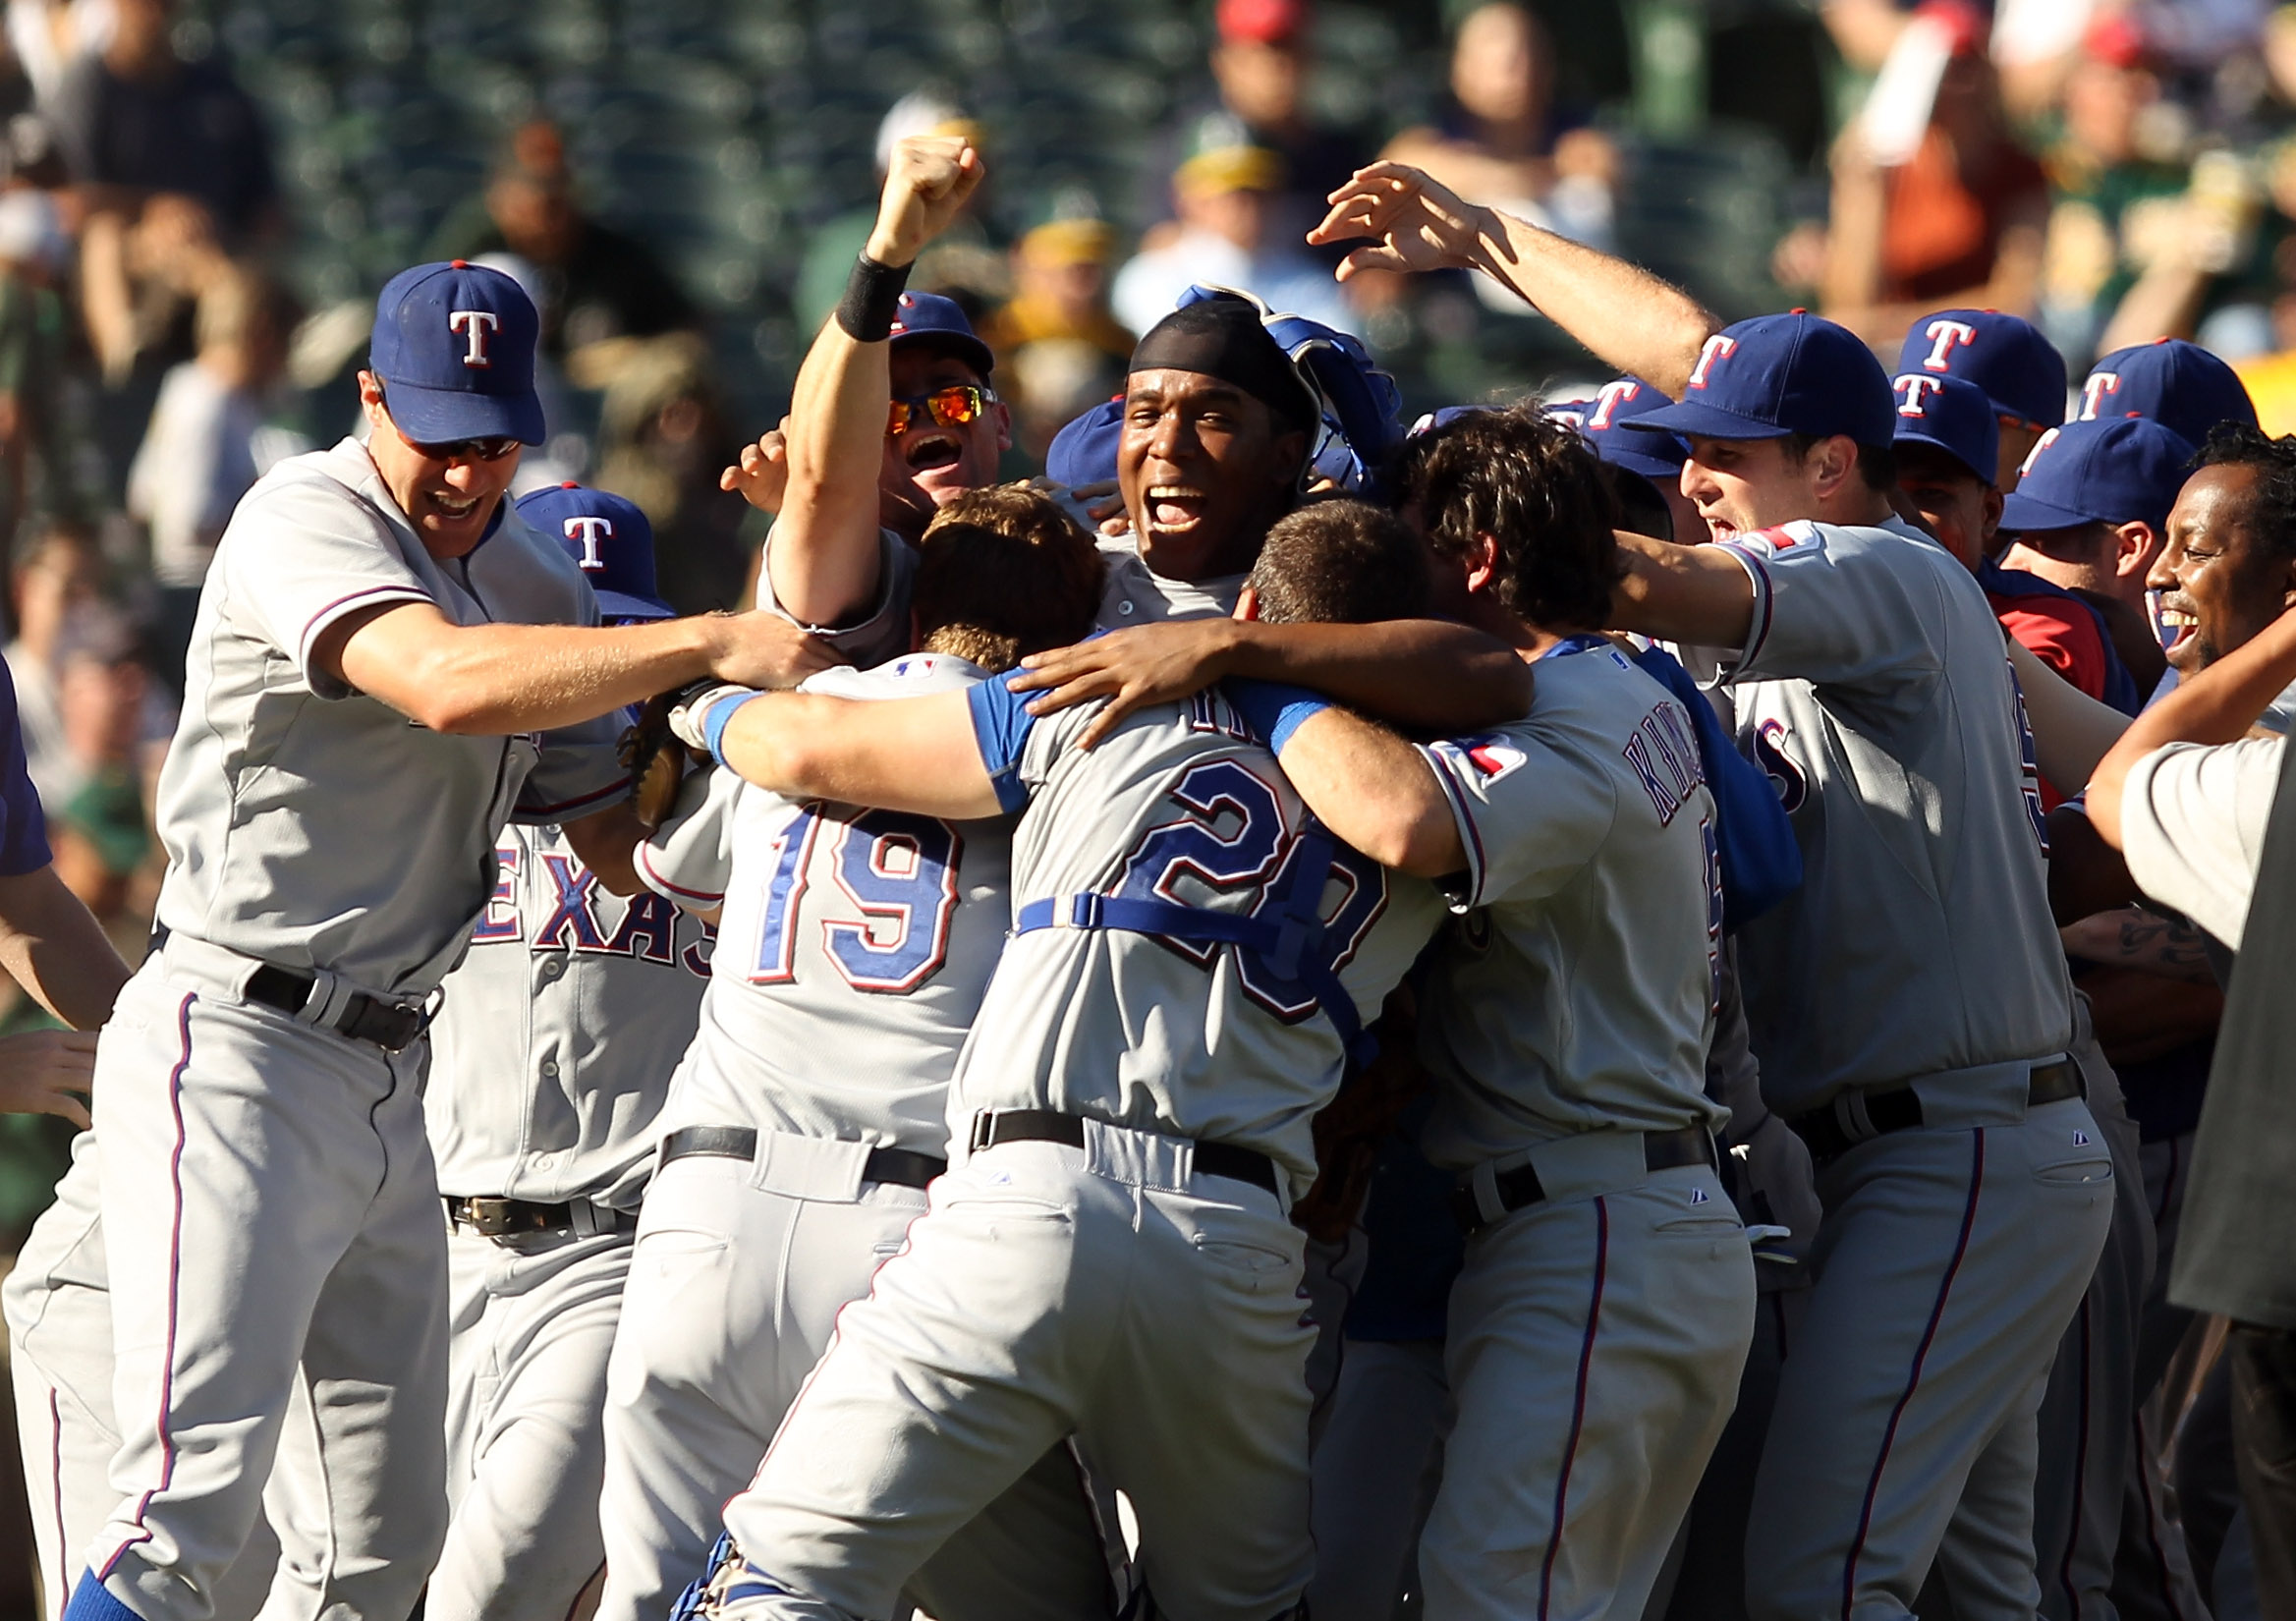 Rangers have controlled AL West all season, but lingering issues have Astros  creeping